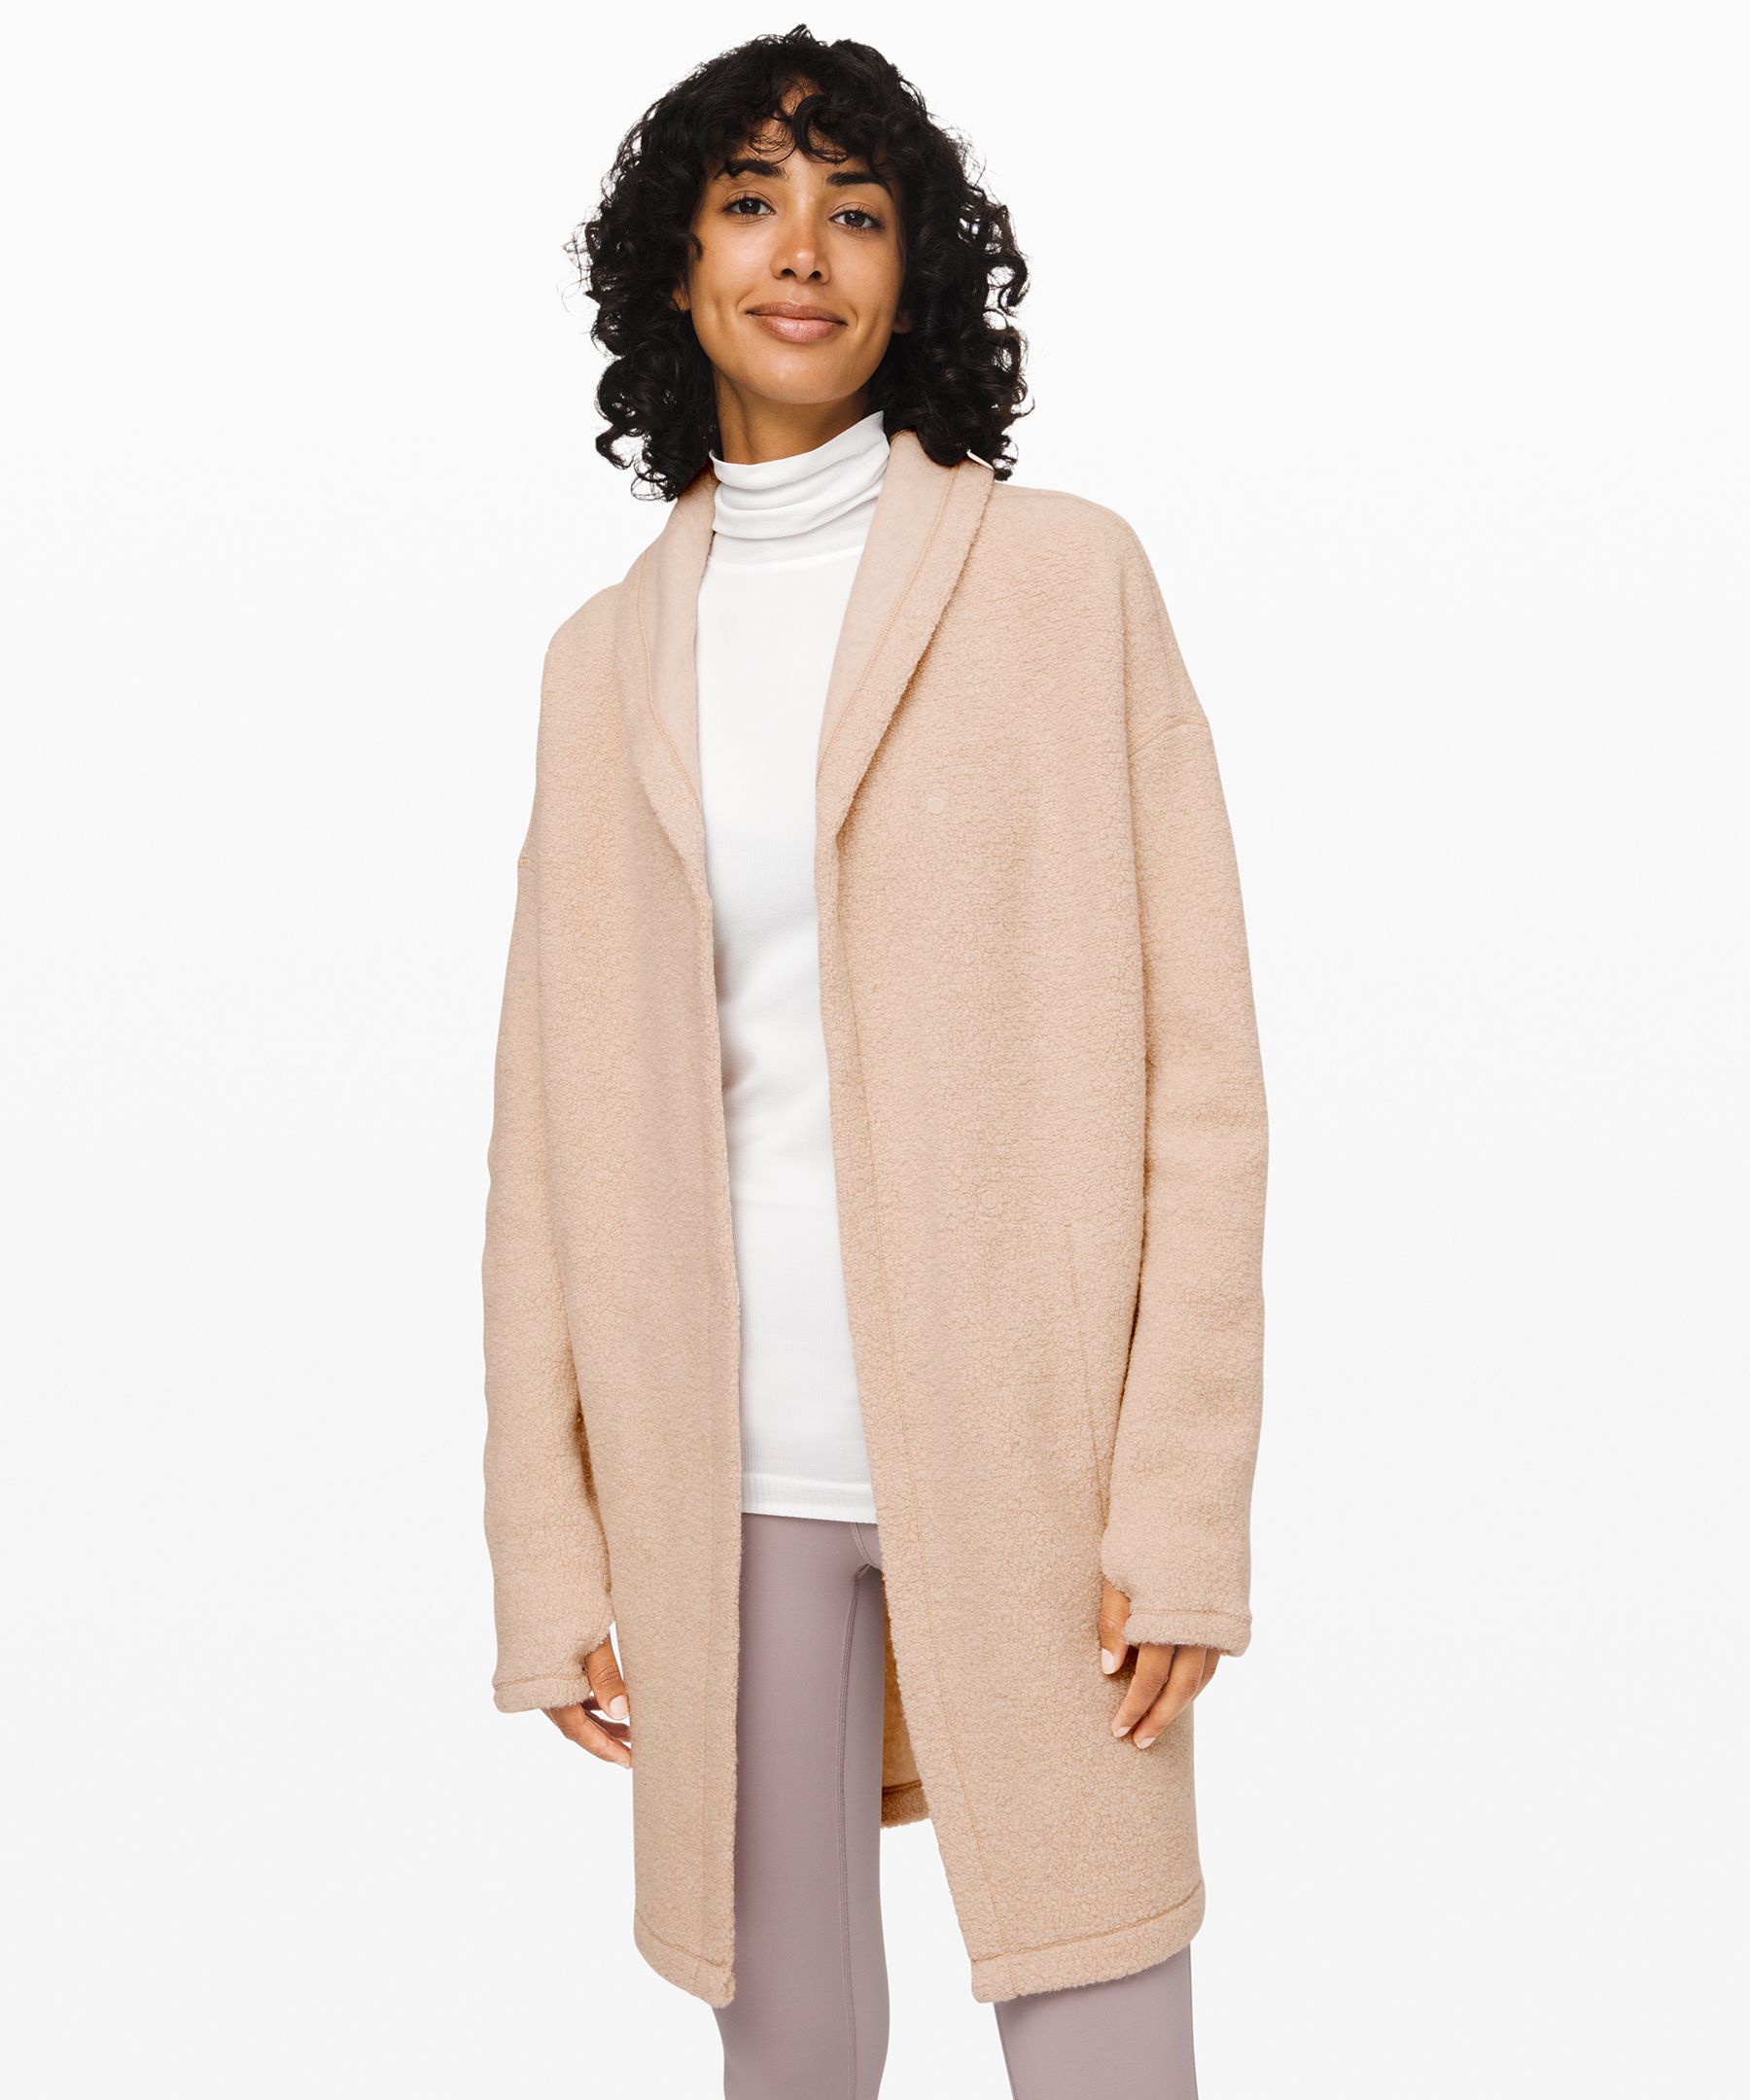 Lululemon Sincerely Sherpa Wrap In Heathered Cashew